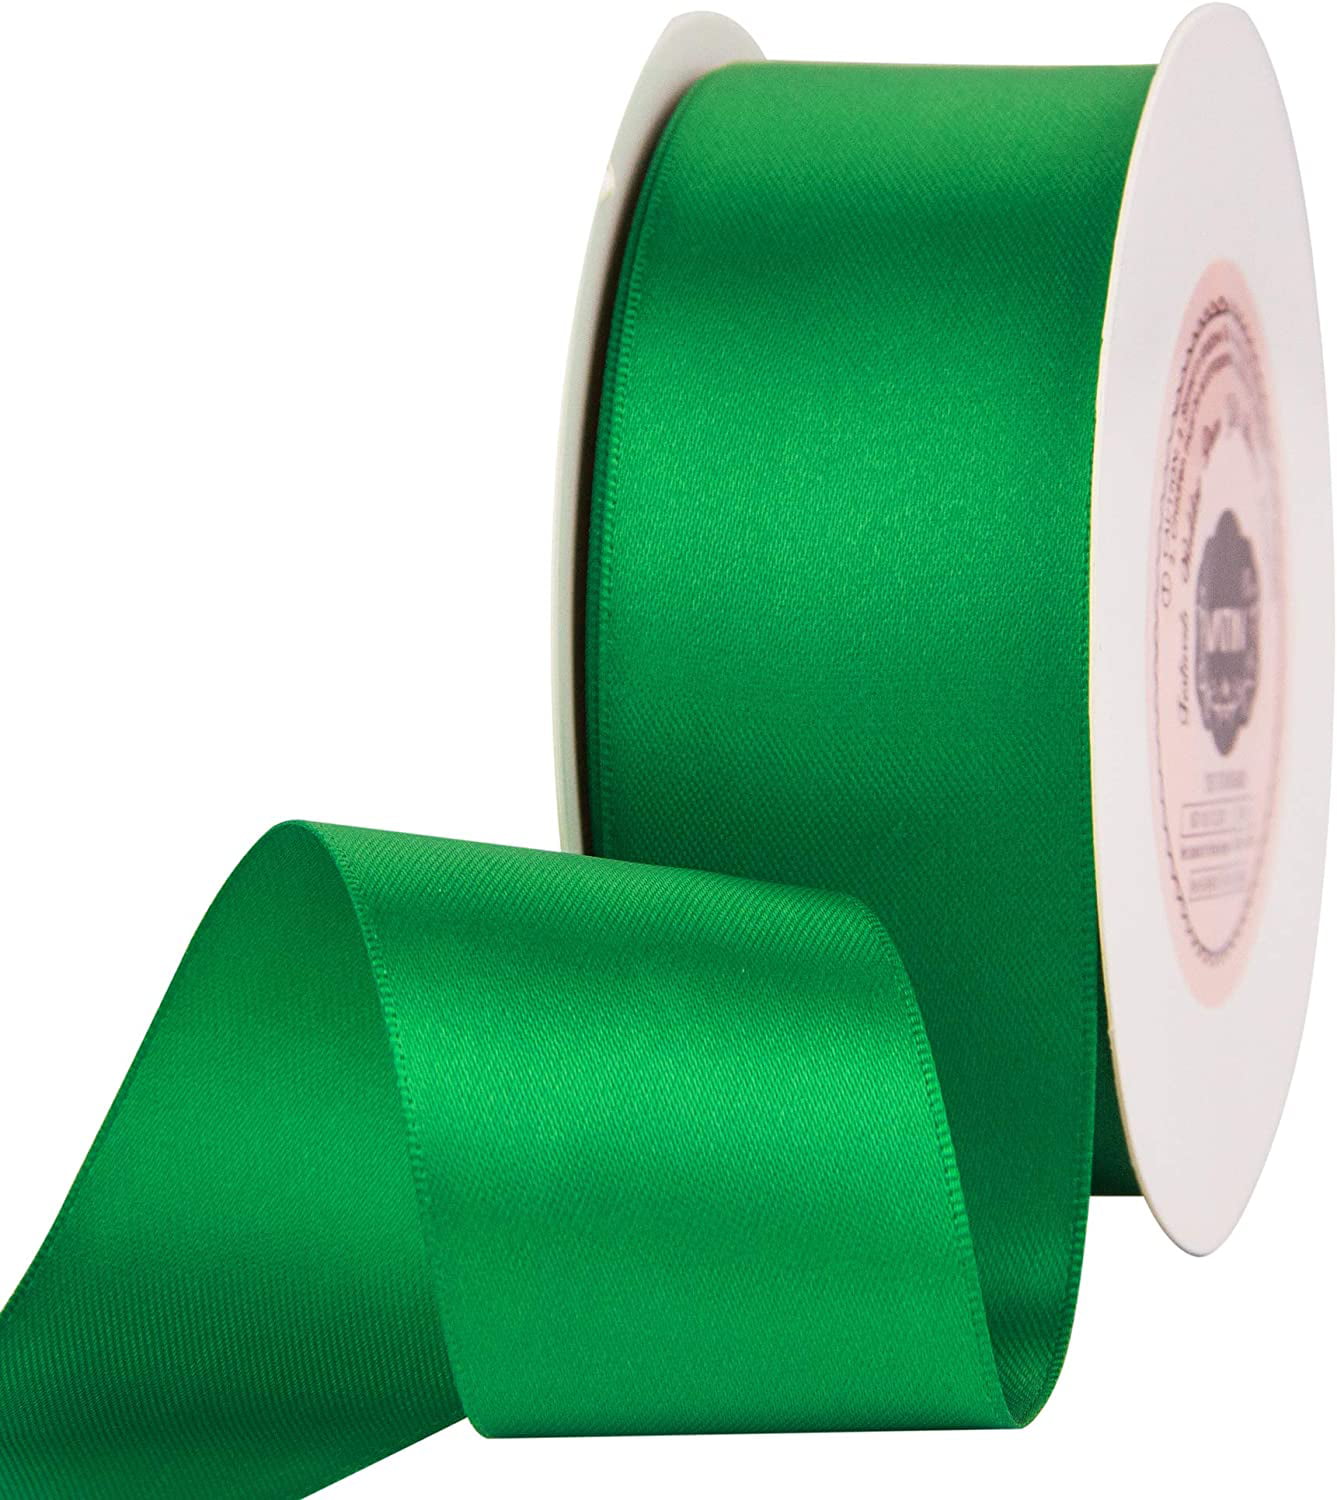 VATIN 1-1/2 Wide Double Faced Polyester Apple Green Satin Ribbon Continuous Ribbon- 25 Yard Perfect for Wedding Bow Making & Other Projects Gift Wrapping